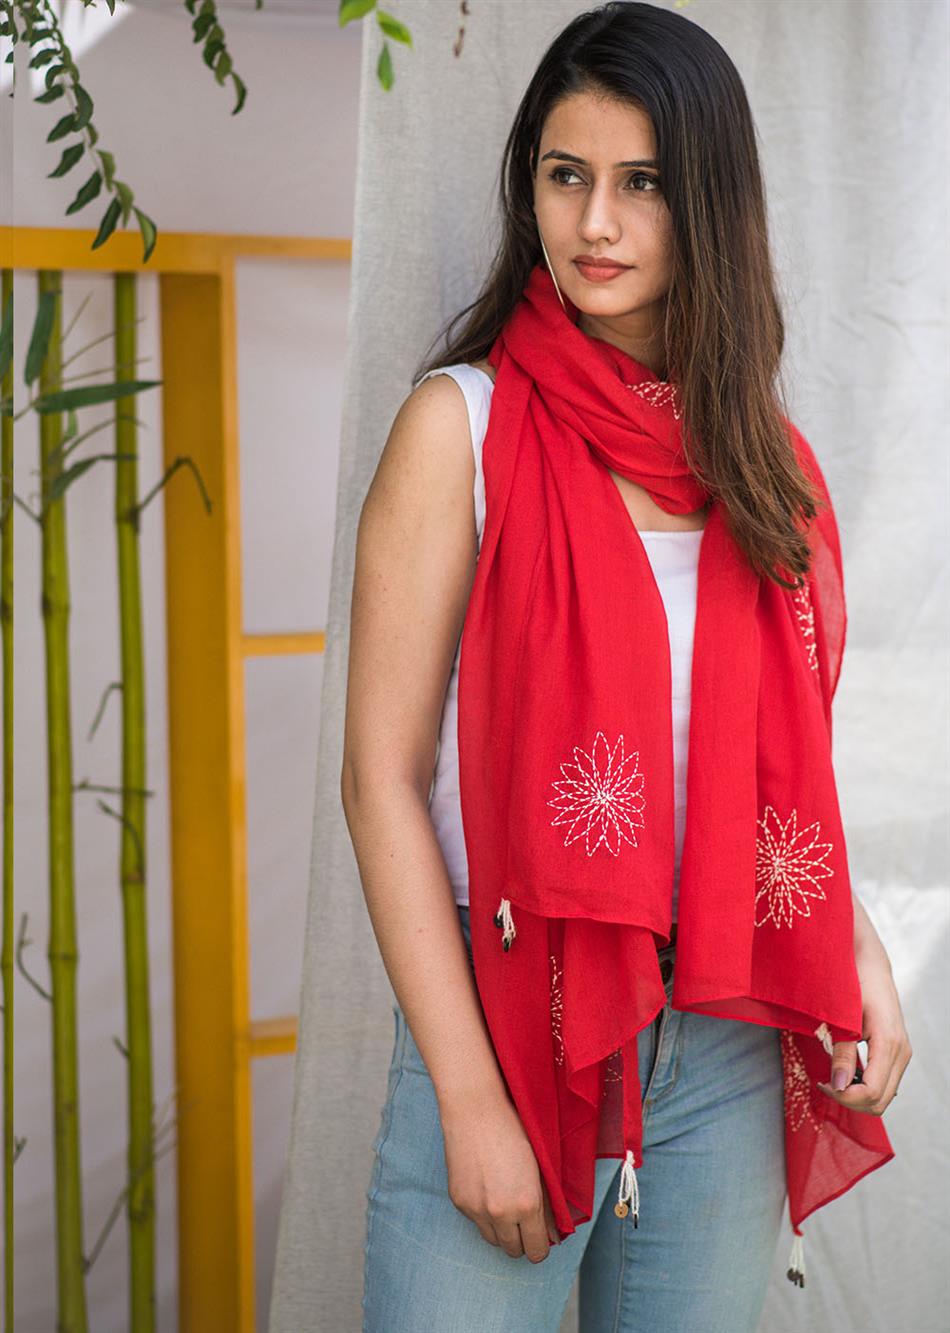 Balletic Mood - Red Hand Embroidered Scarf By Jovi Fashion